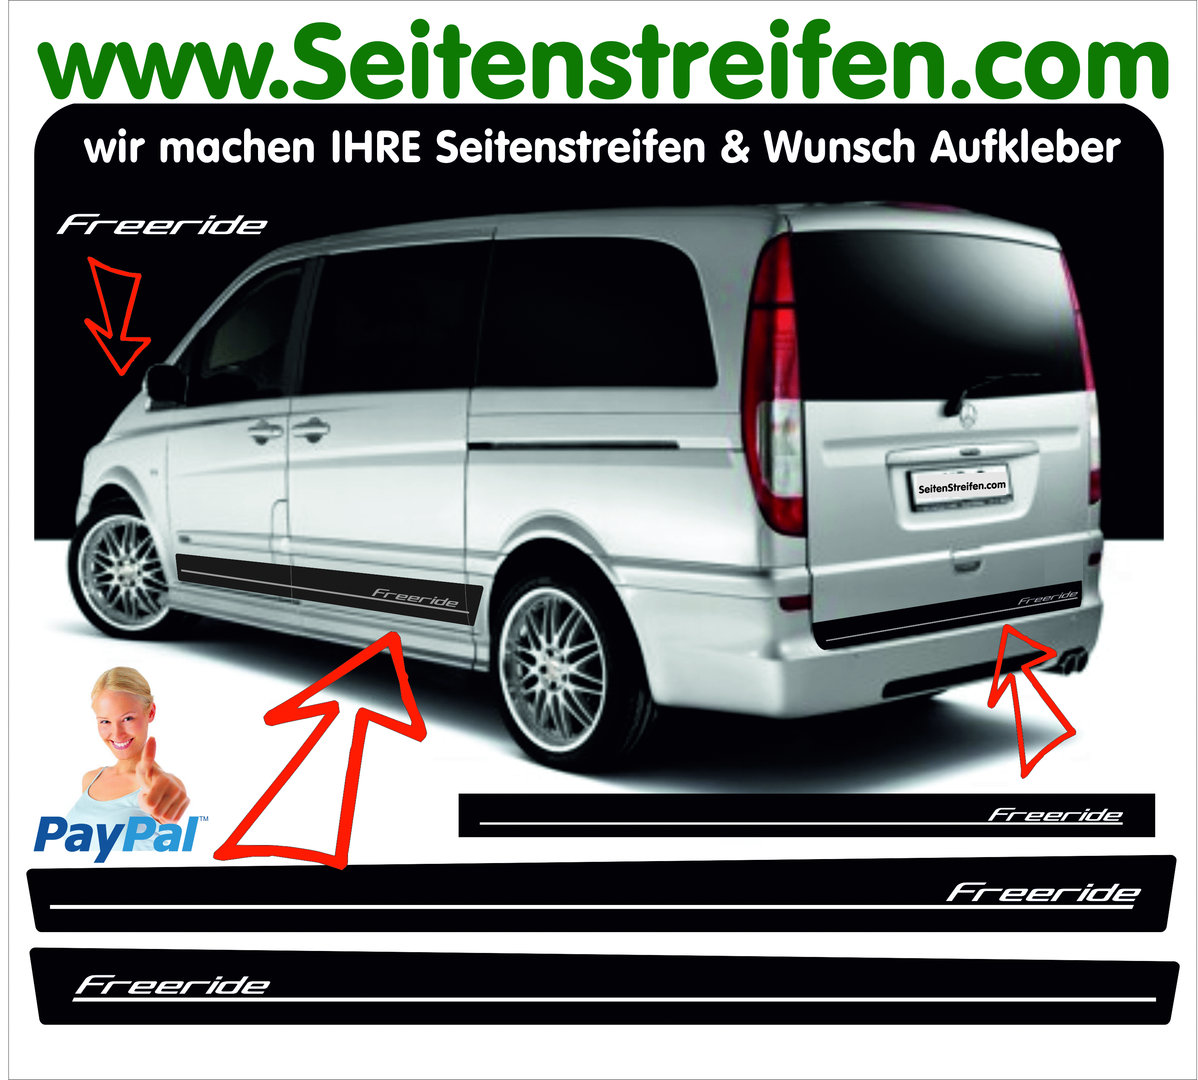 Mercedes Benz Vito & Viano - Freeride - Side Stripes Graphics Decals Sticker Kit - N° 1677